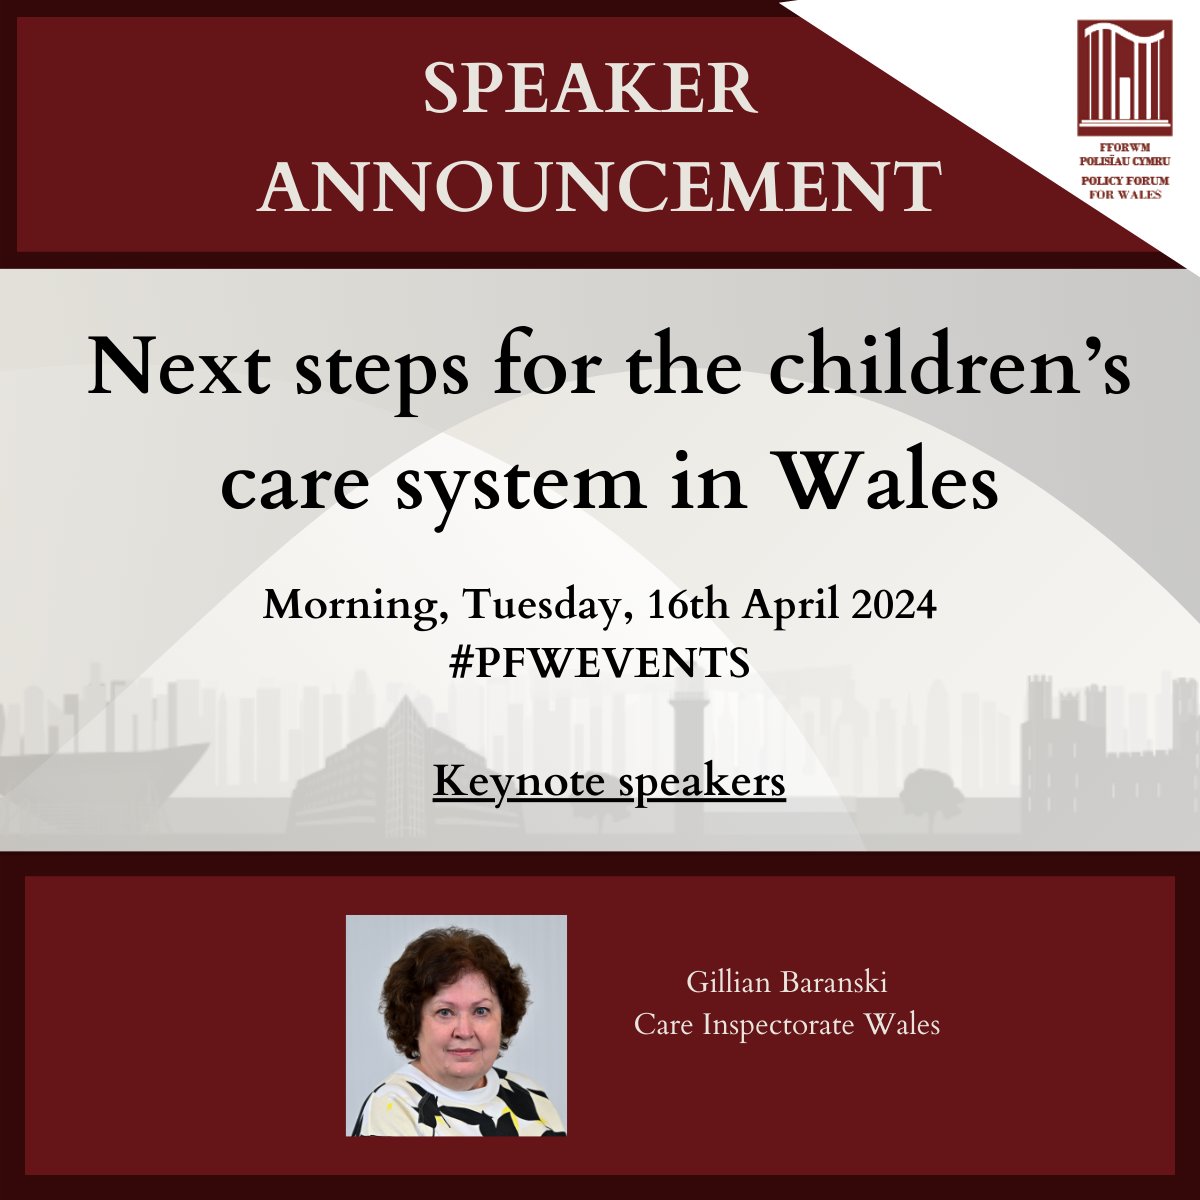 Don't miss out on the chance to attend our exciting conference on the 16thof April as #PFWEVENTS discusses Next steps for the children’s care system in Wales! Hear from renowned keynote speaker @care_wales Get more info here: policyforumforwales.co.uk/conference/PFW…